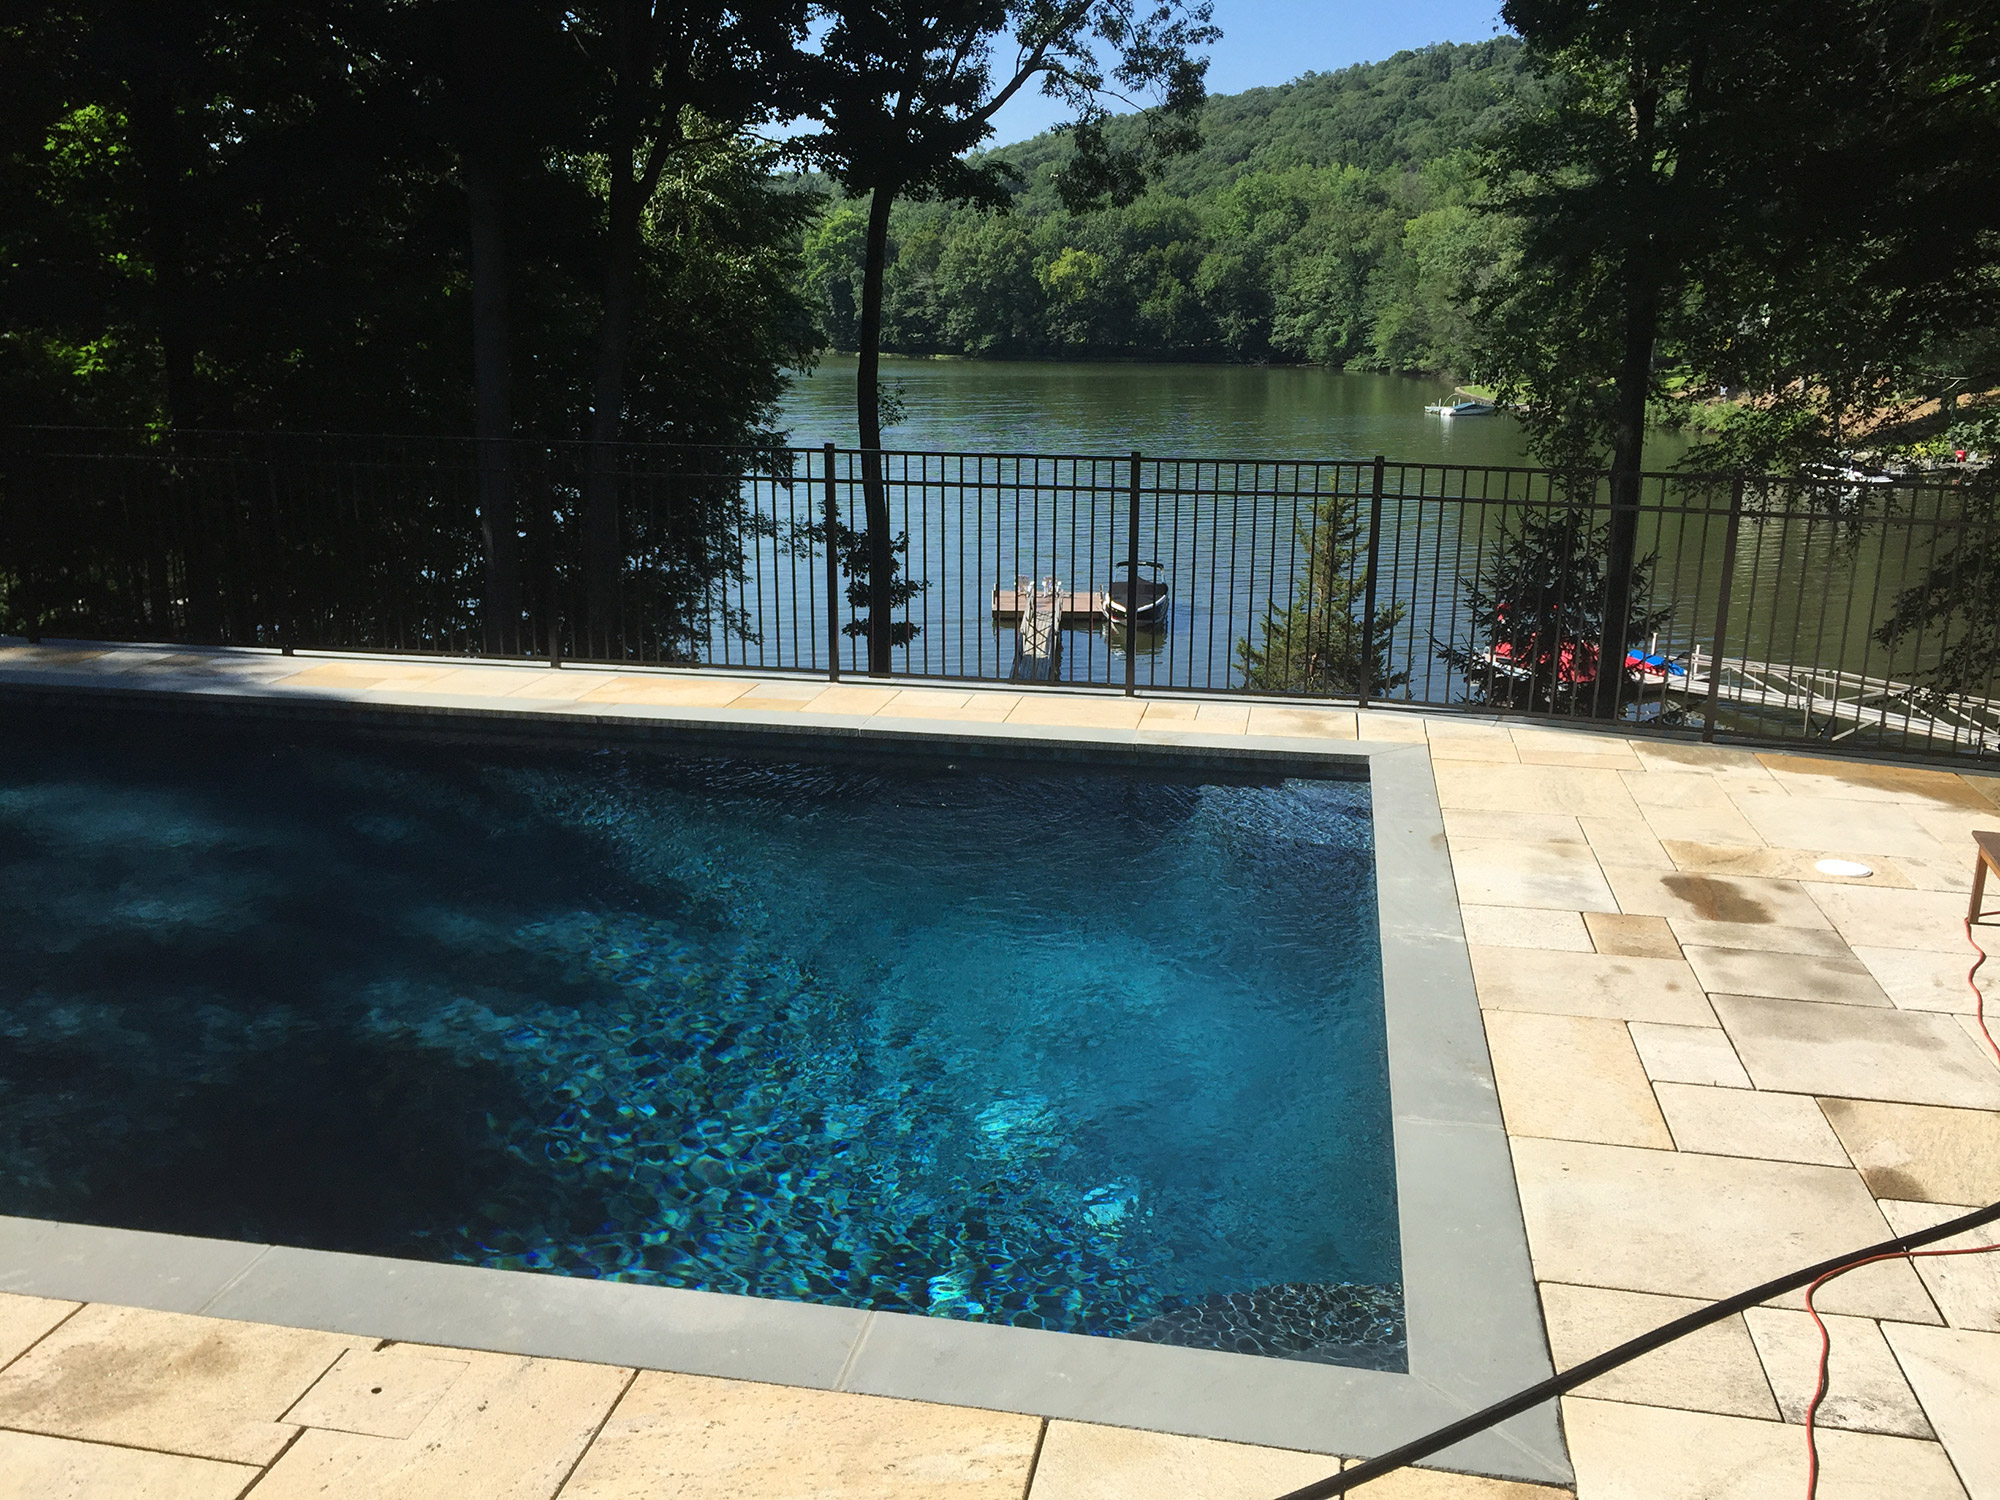 A pool with a railing overlooking a lake, enhancing safety.